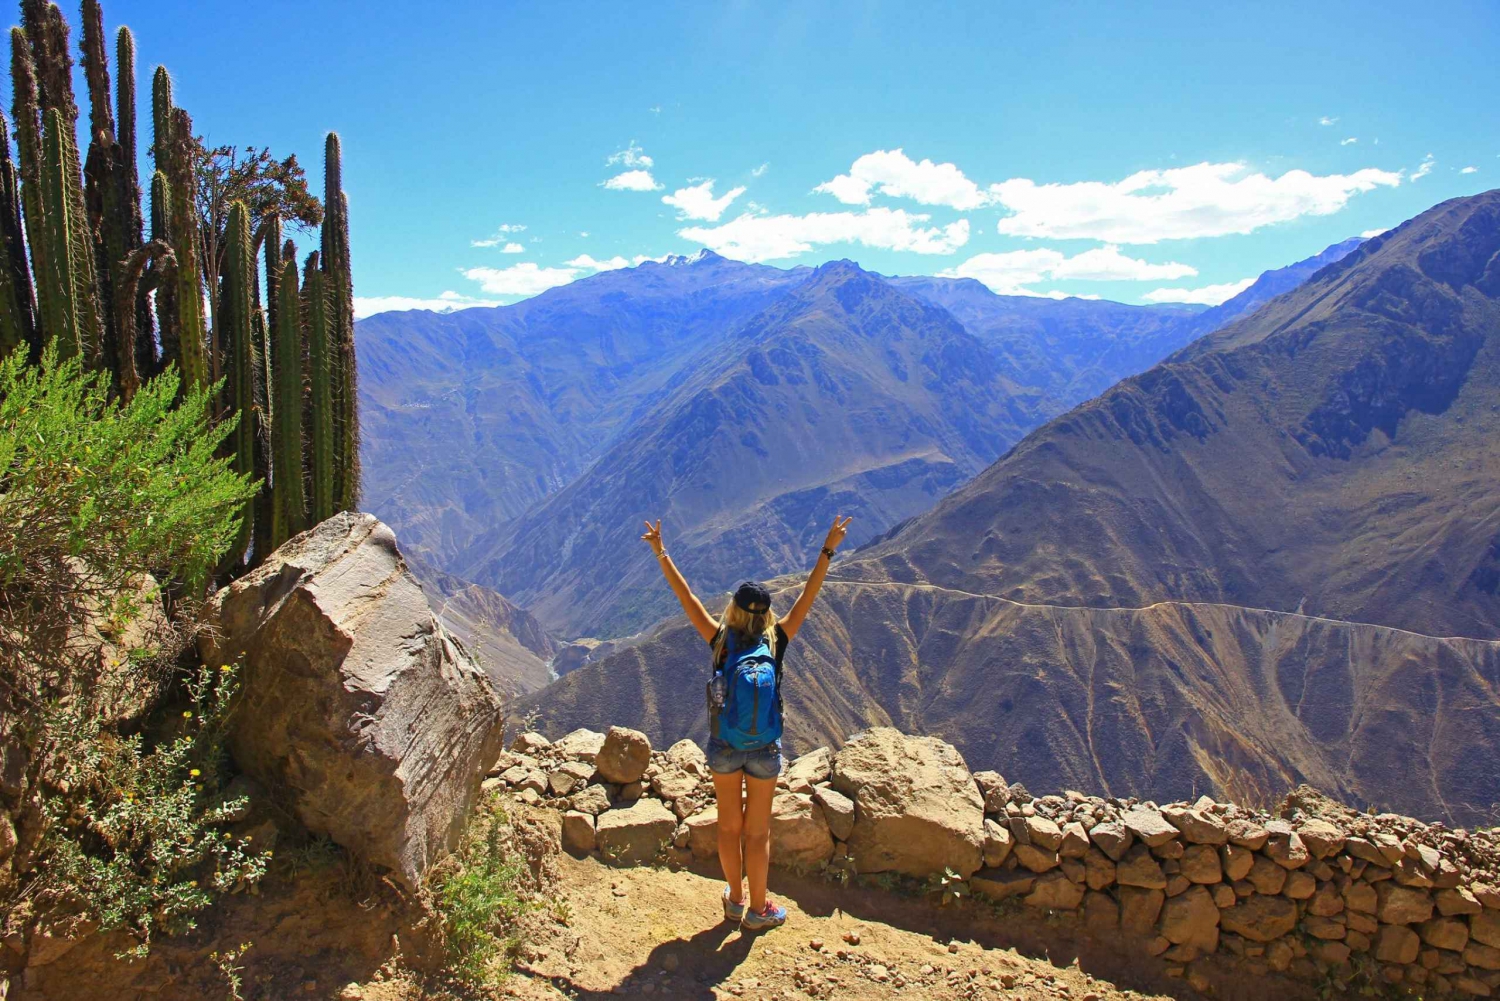 From Arequipa: 2-Day Trekking Tour to Colca Canyon